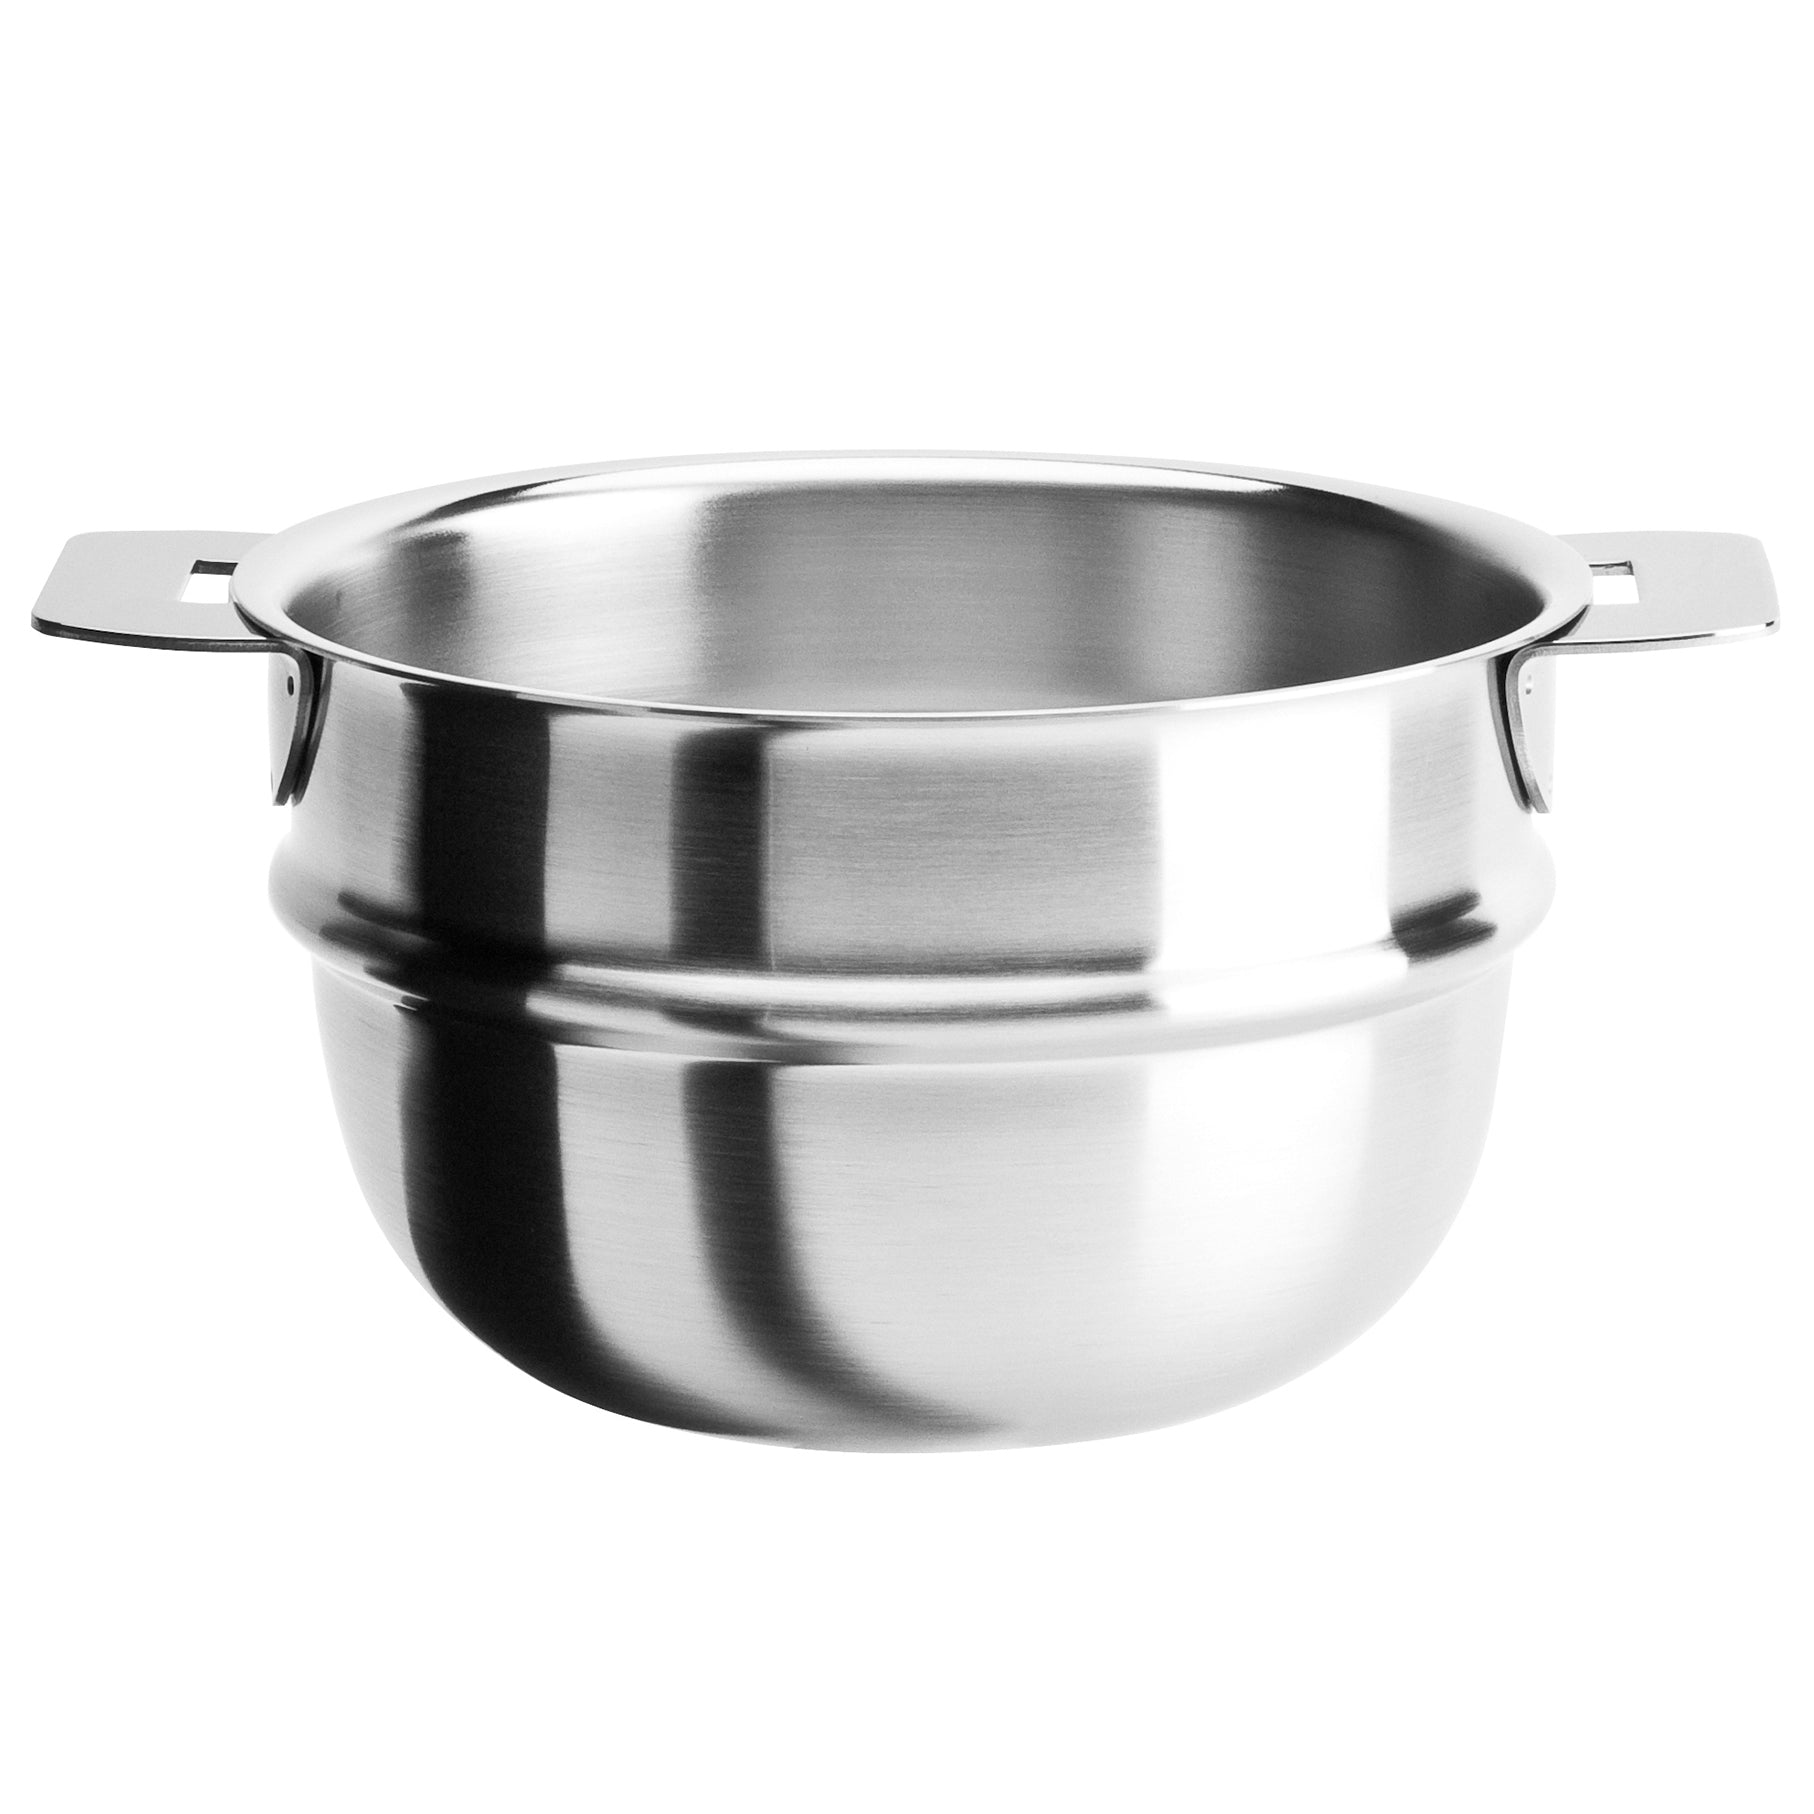 Cristel Strate Cookware Set in Stainless Steel